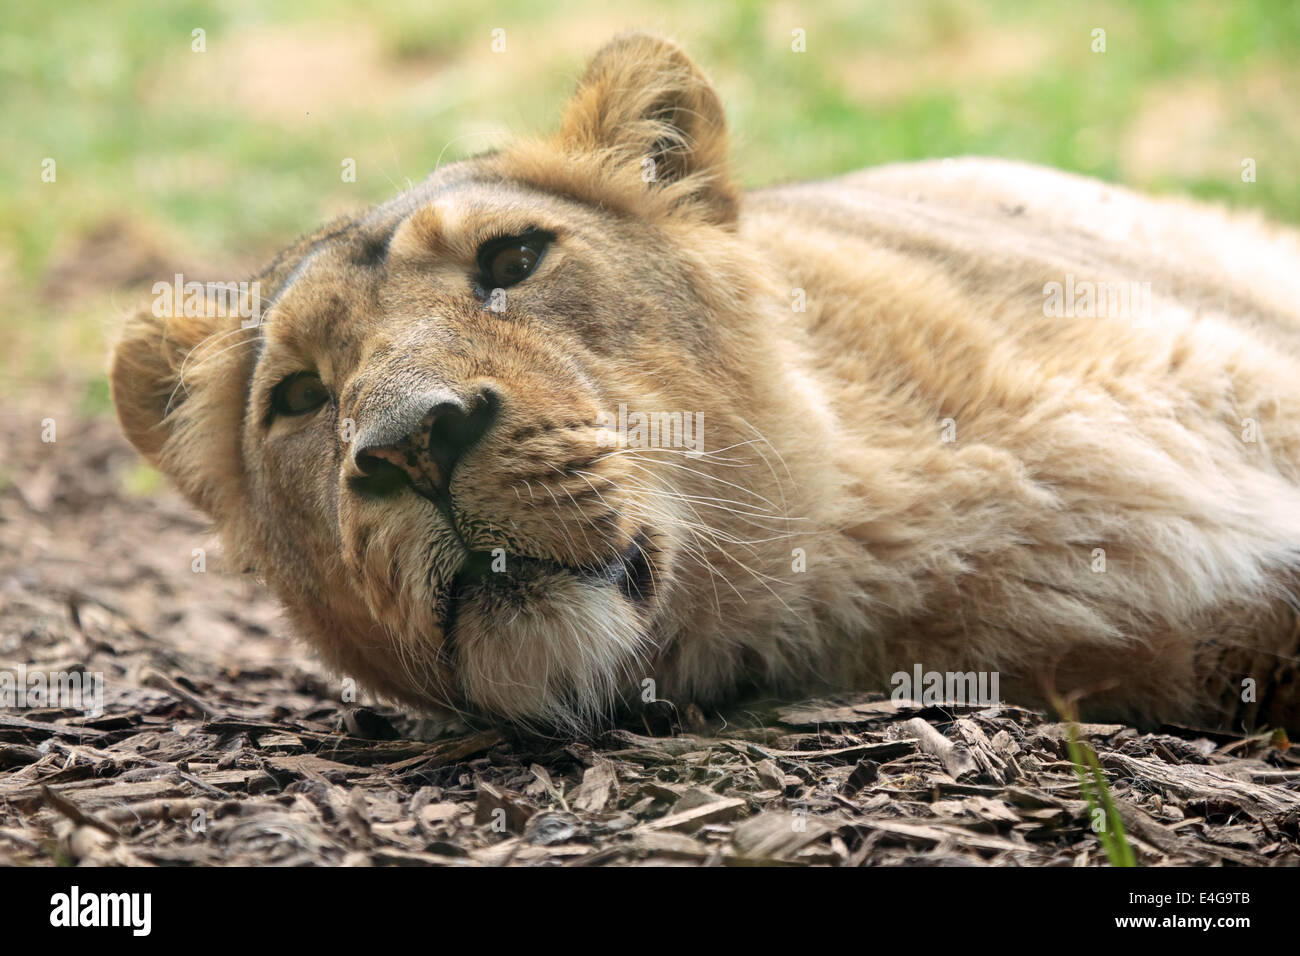 A female lion (Panthera leo) is sleeping on the ground Stock Photo